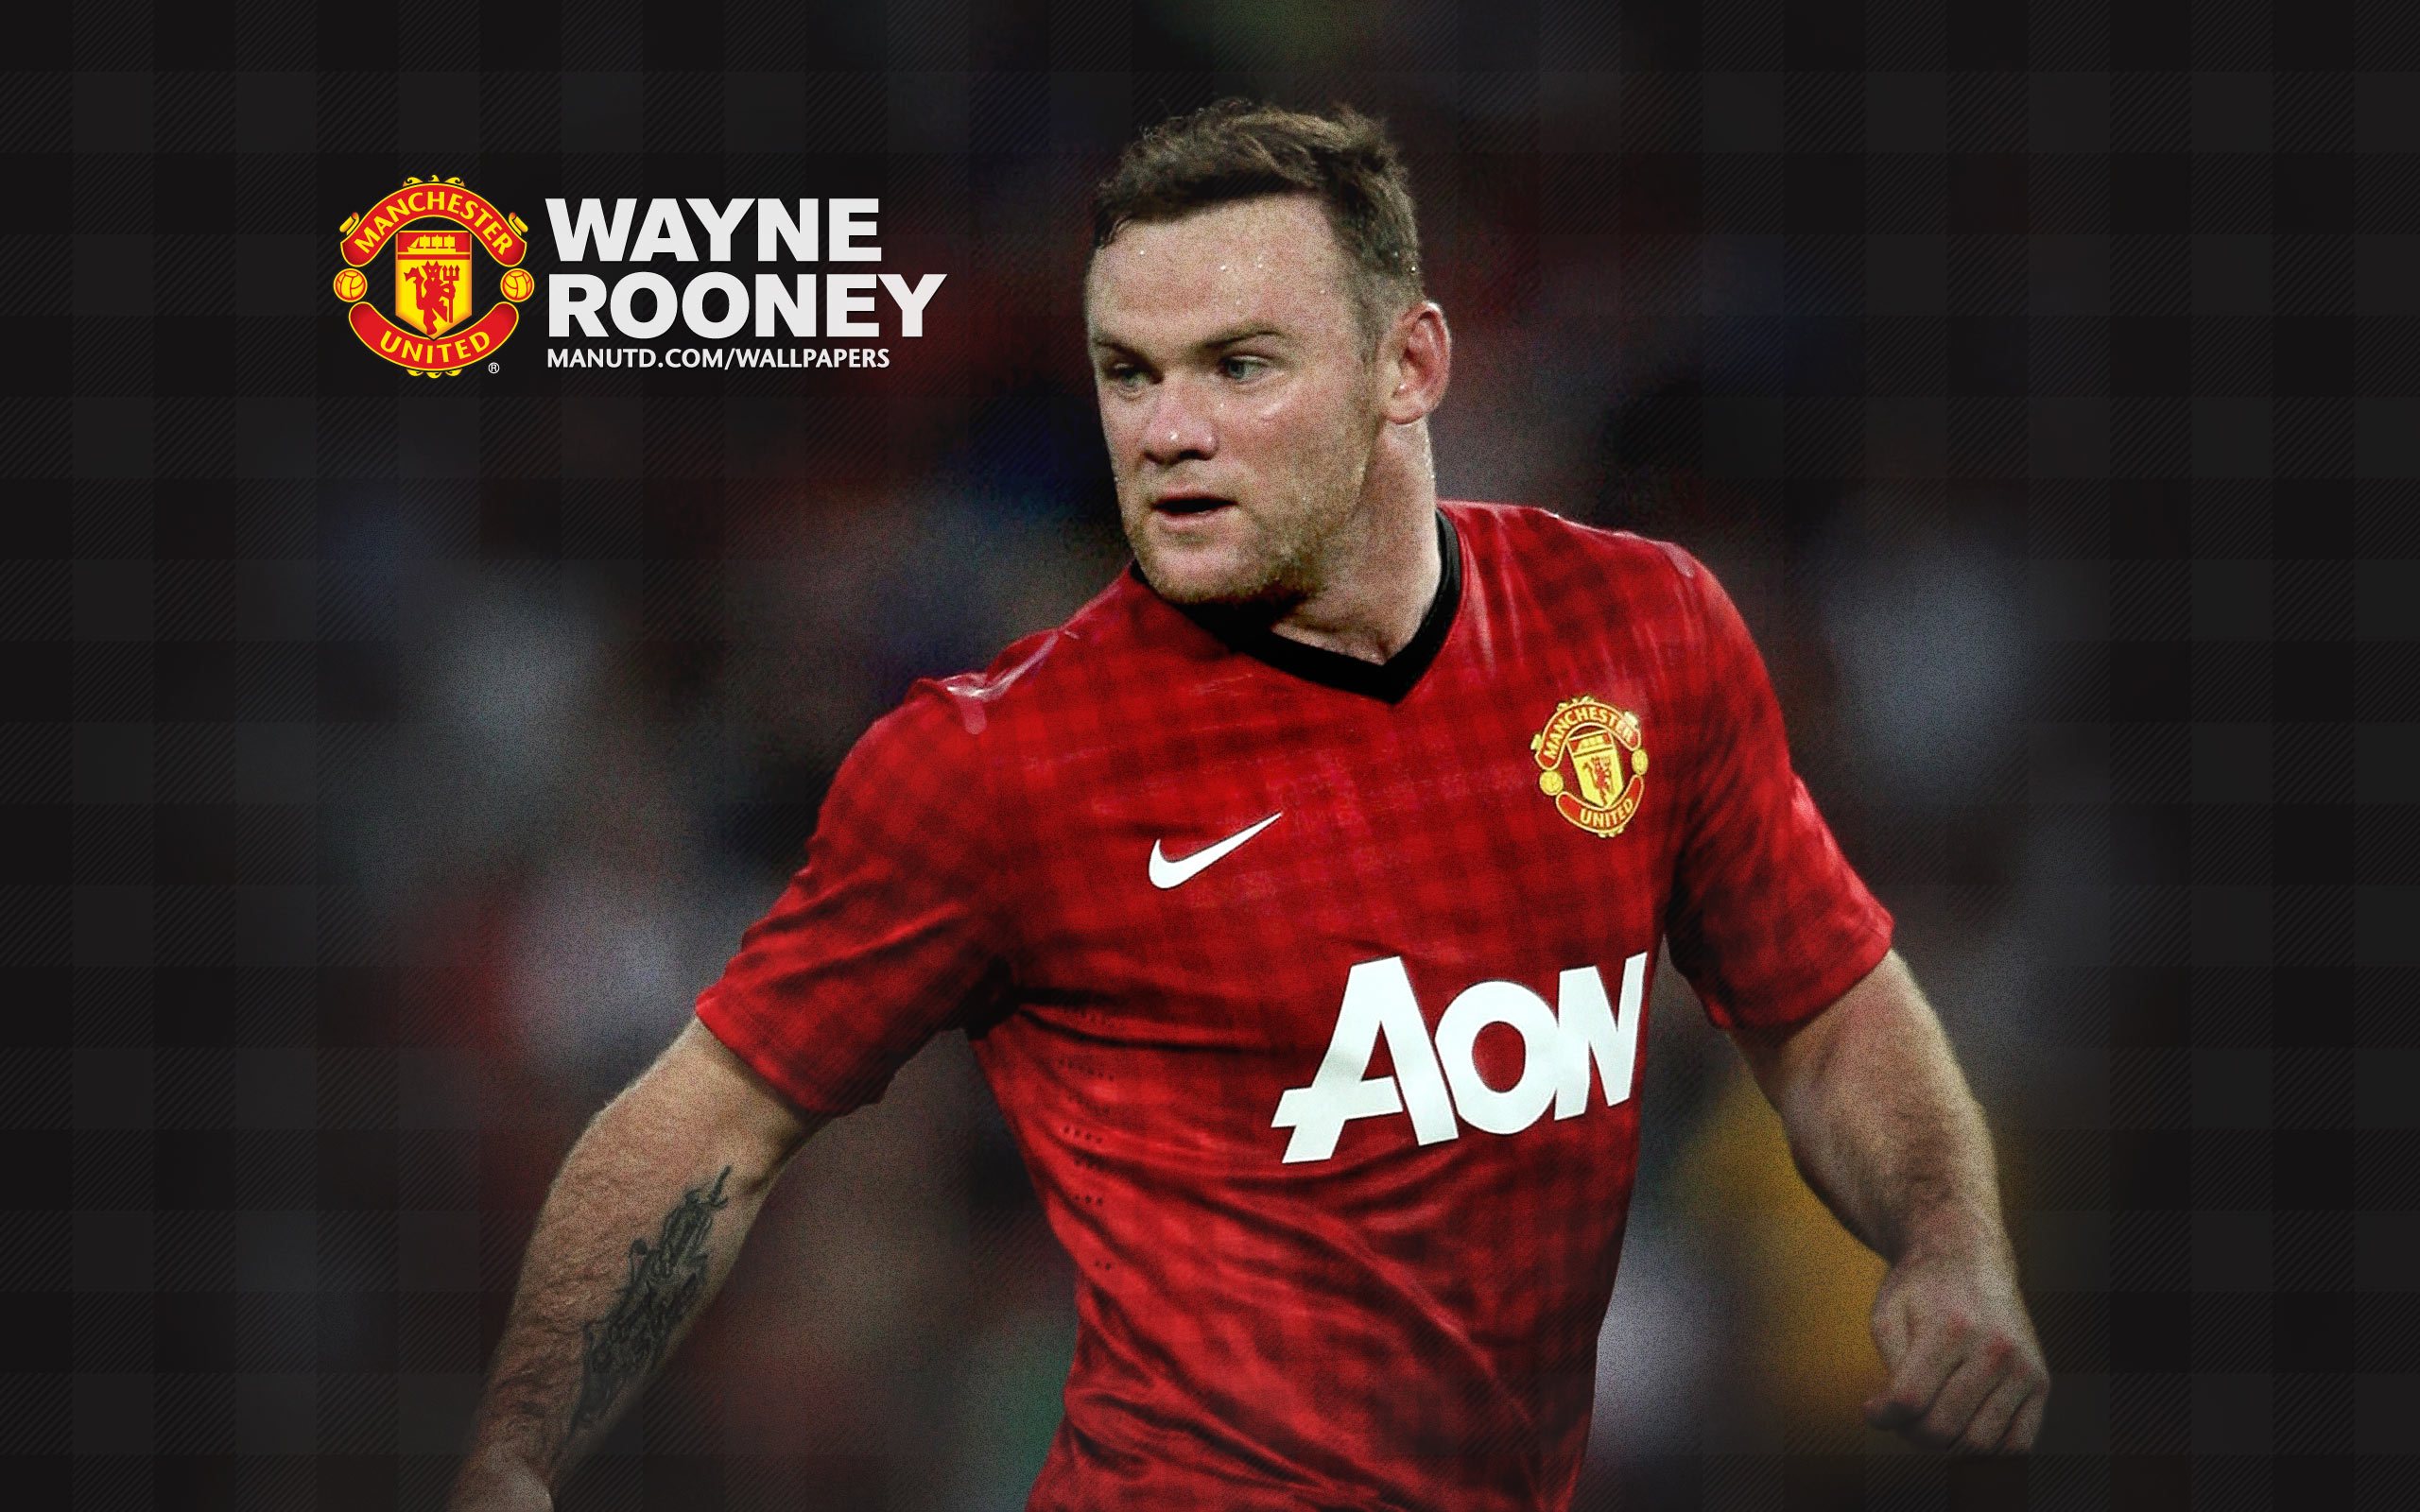 Manchester United Players Wallpaper Wayne Rooney